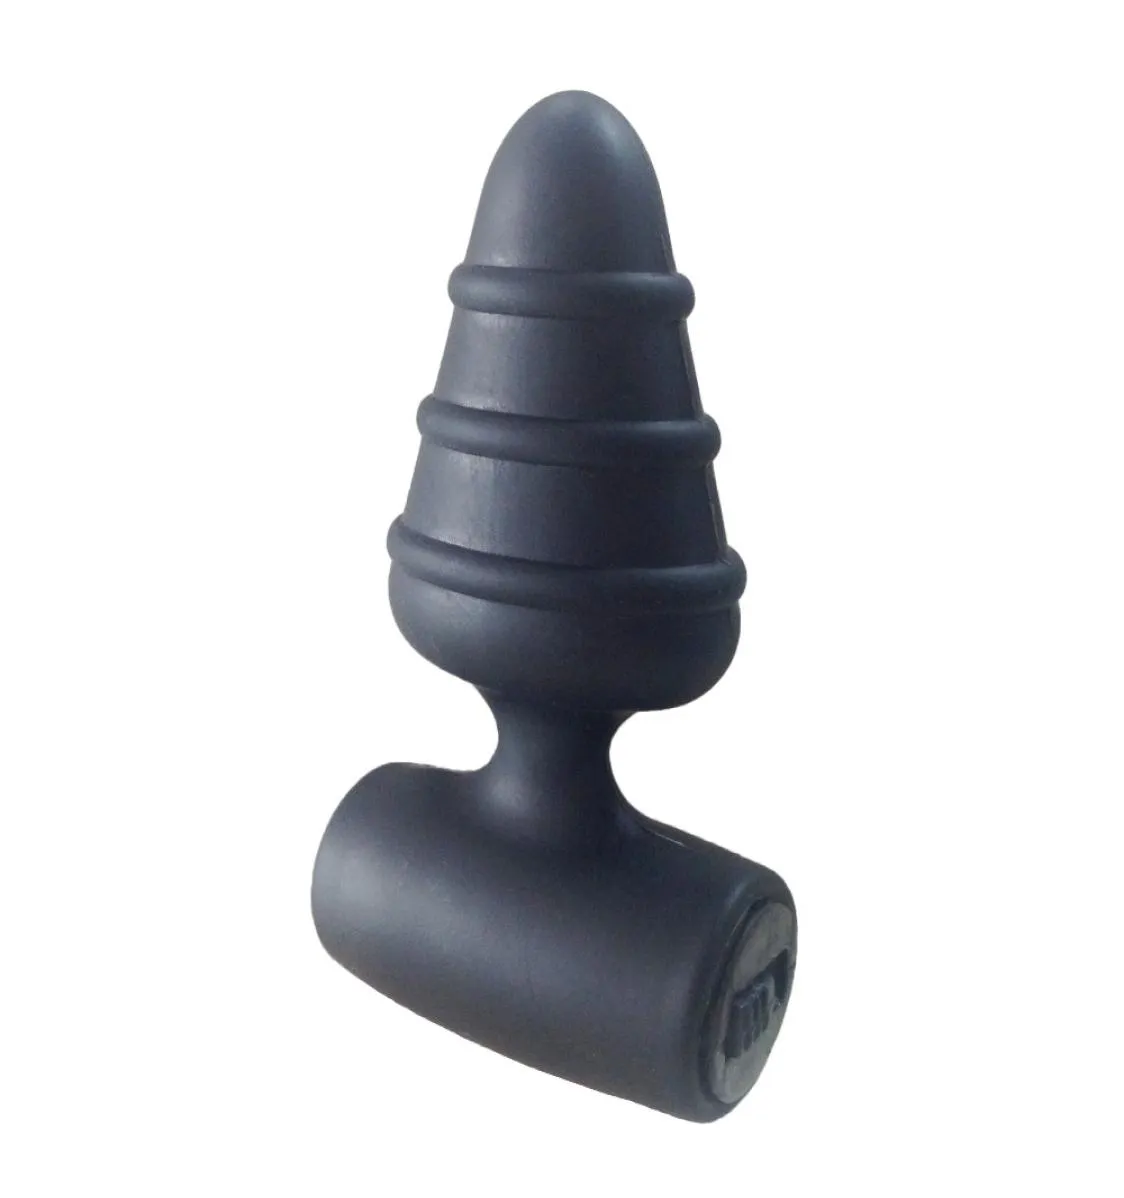 Anal Vibrators Smart Layer Black Silicone Butt Plug Anal Plug Vibrating Sex Products Anal Sex Toys 174179839218